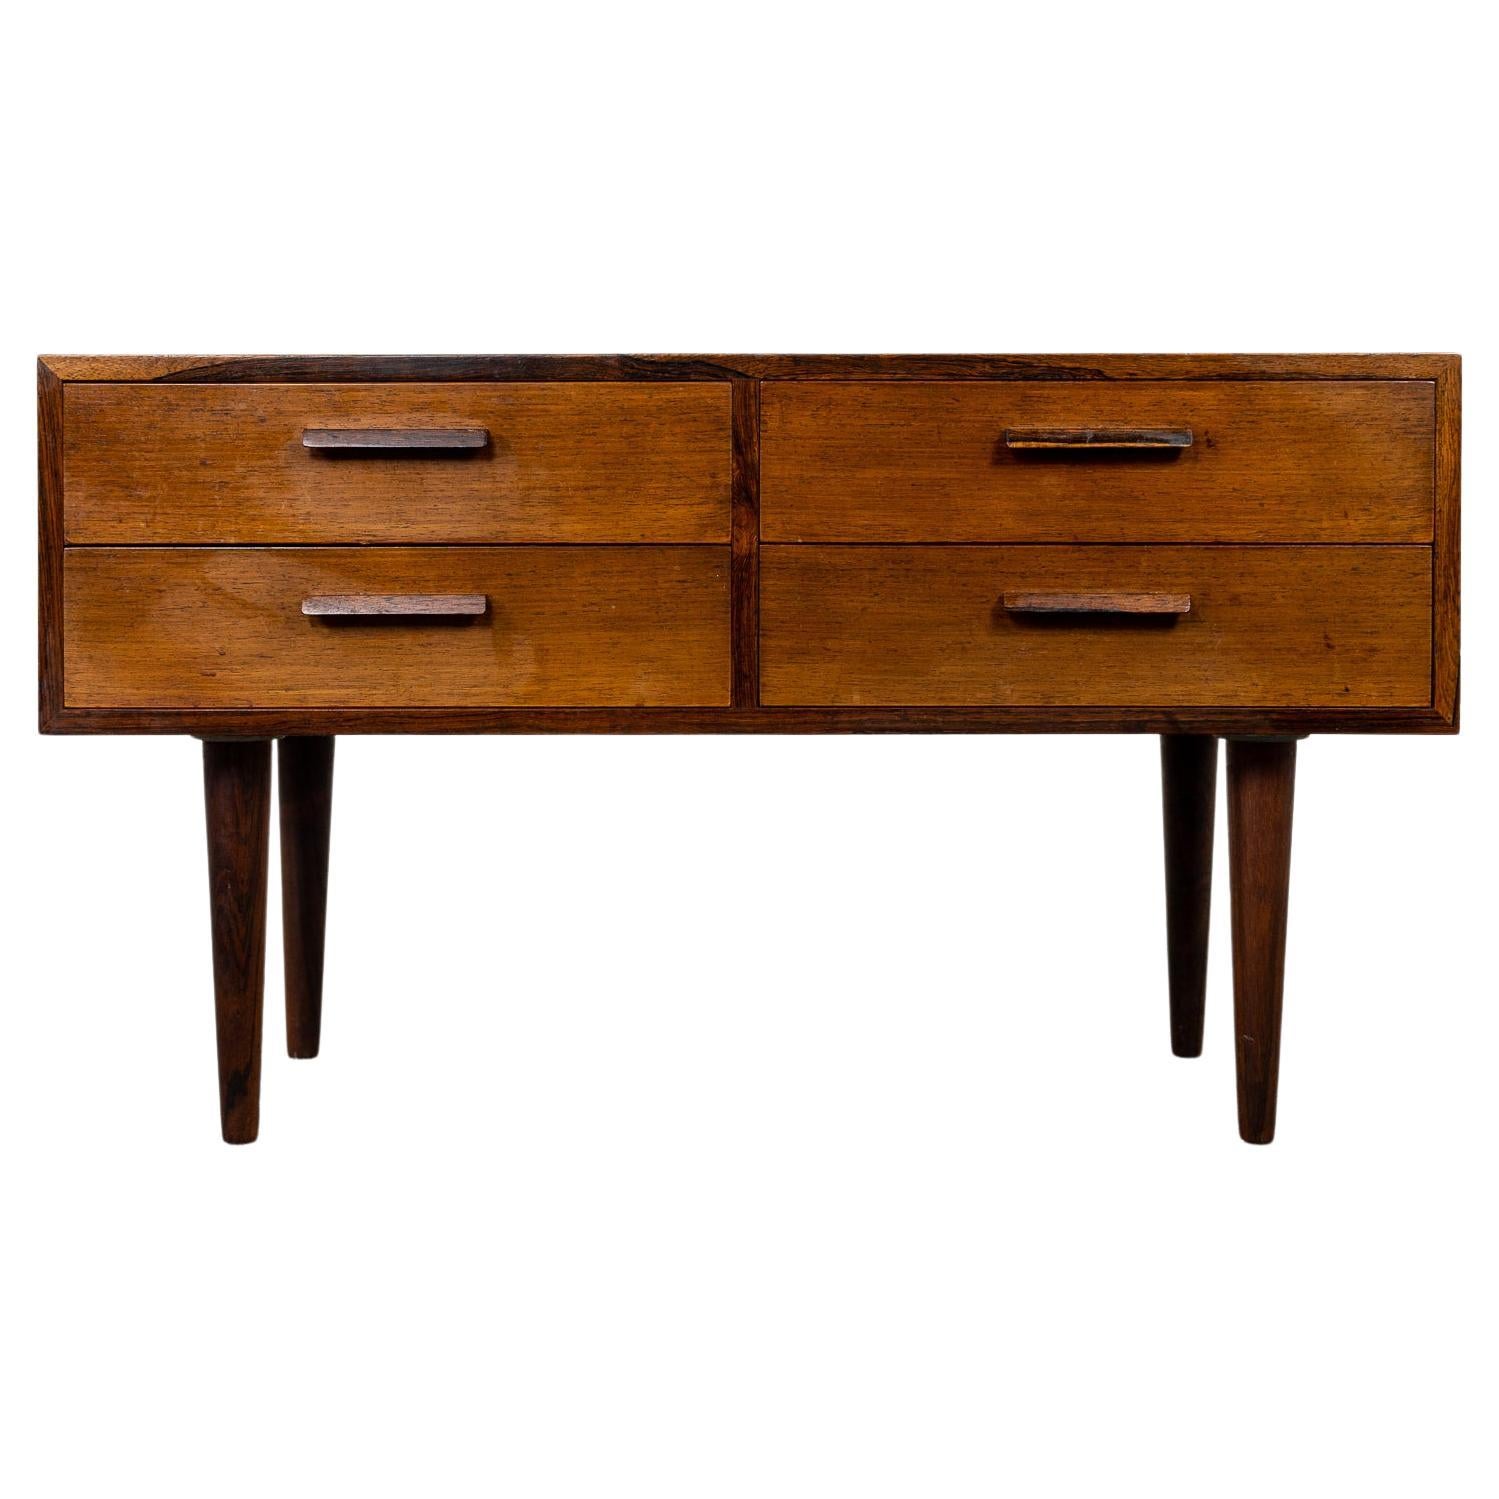 Danish Mid-Century Modern Rosewood Four Drawer Bedside Table